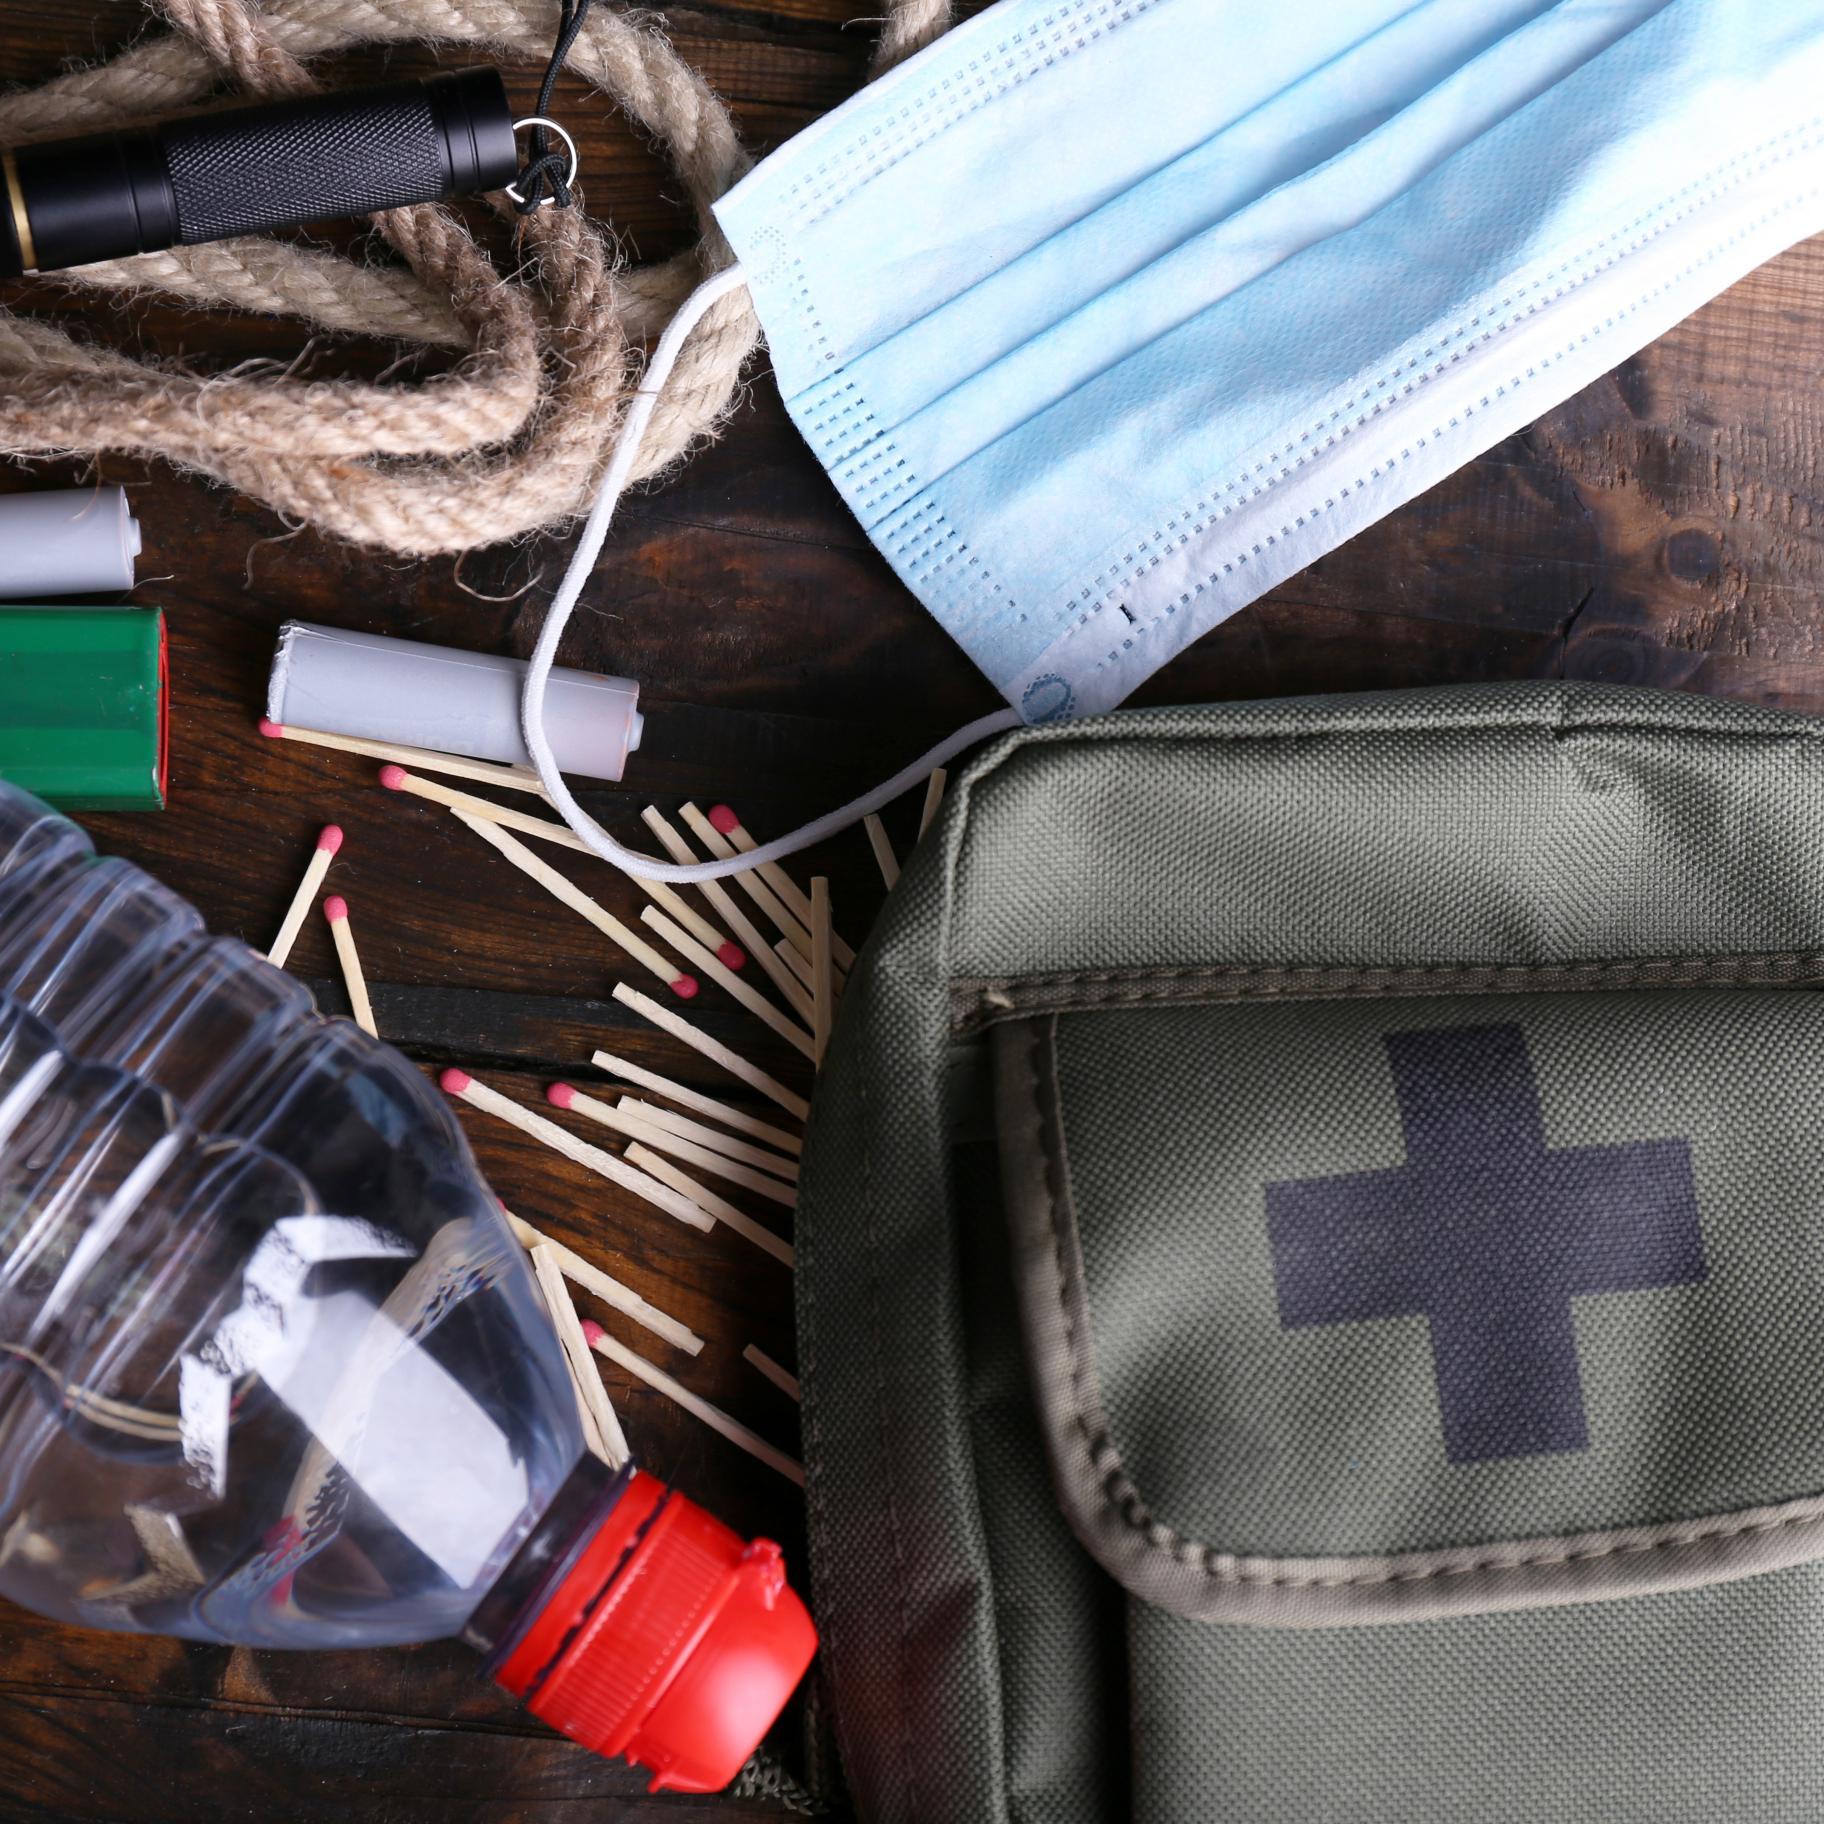 Get your monthly box of survival gear and education. Save 10% with code: TW10